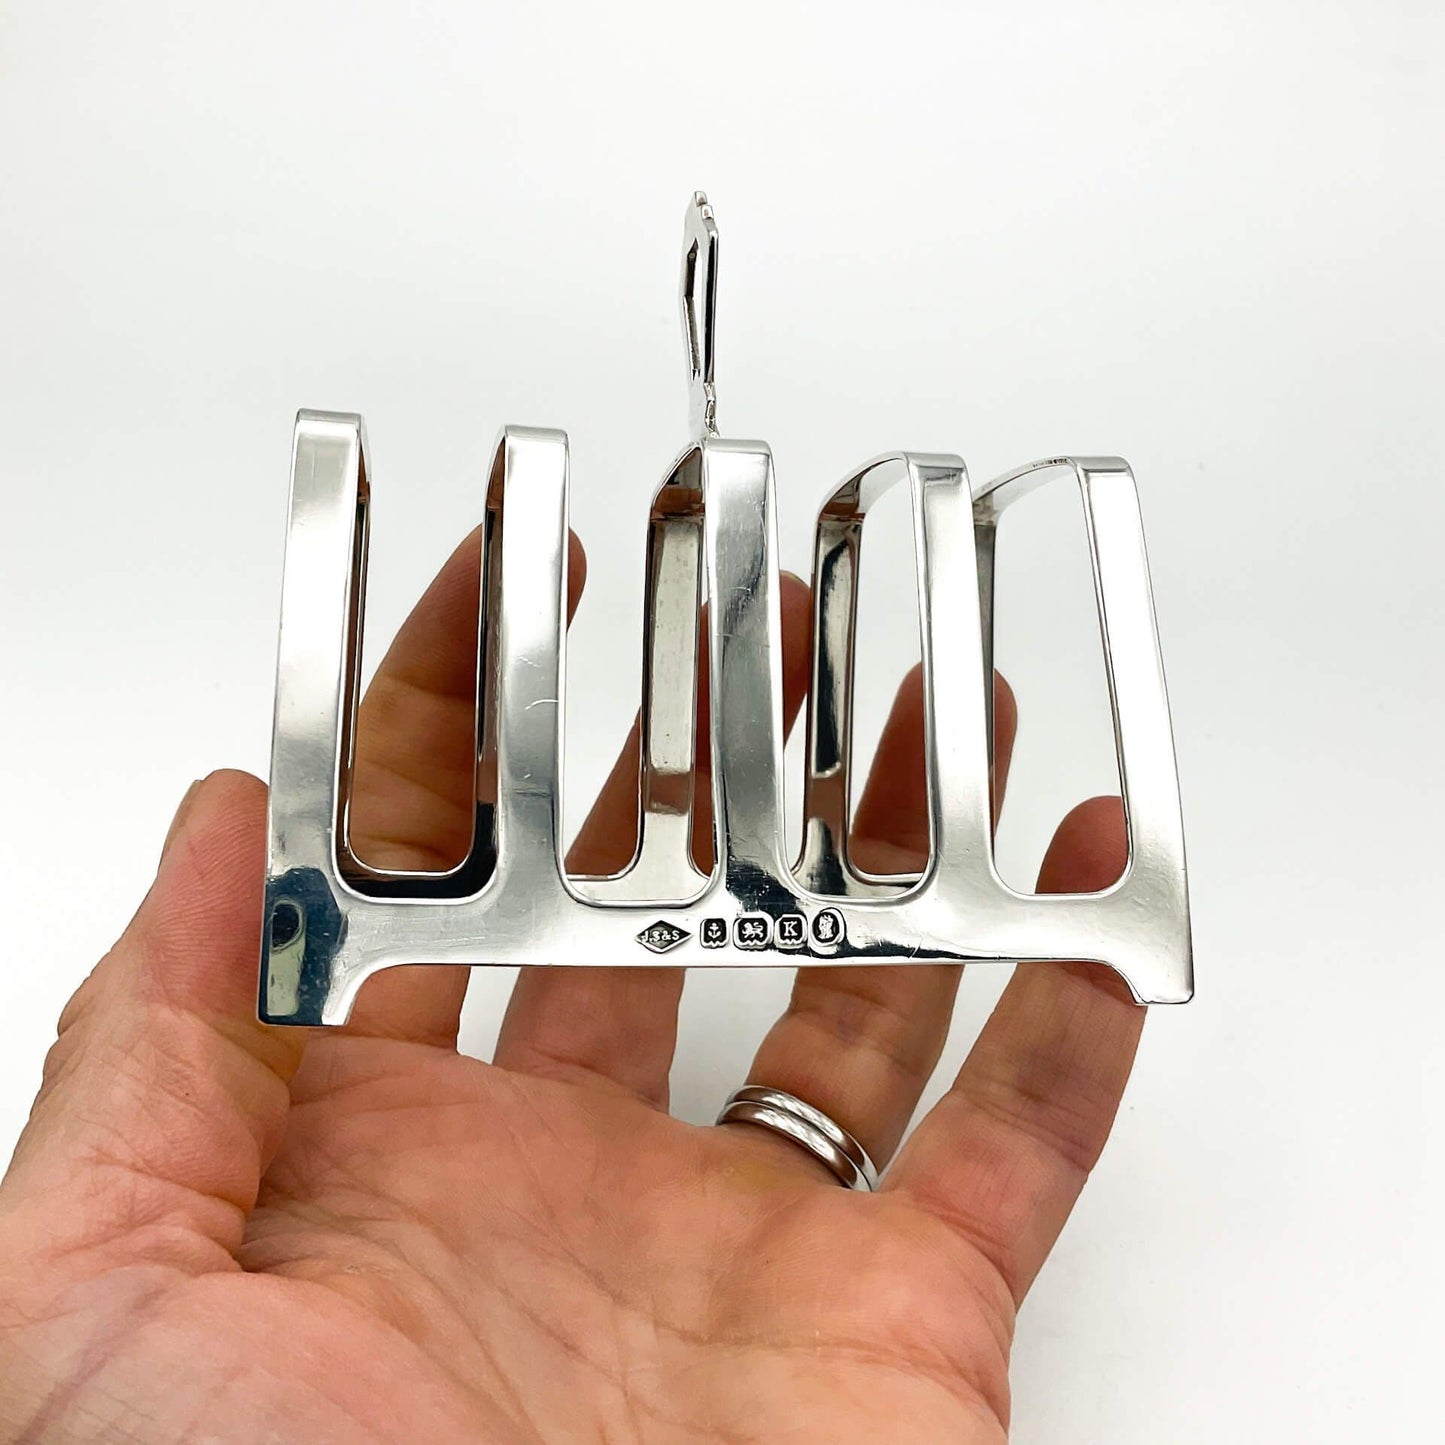 Art deco style silver toast rack on a white background Held in hand